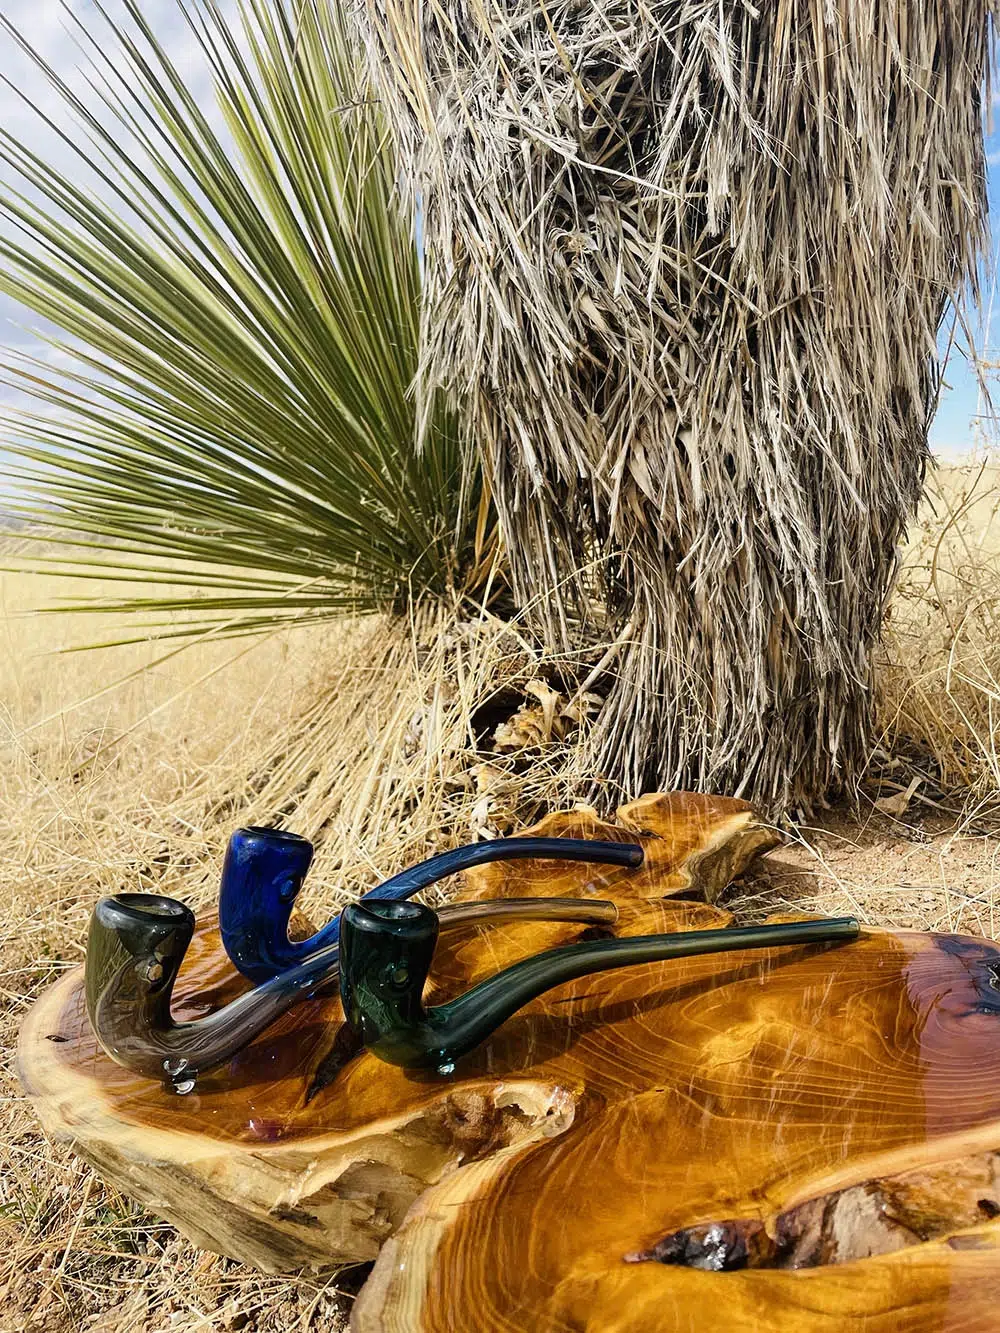 three staggered glass gandalf pipes in teal black and blueon wooden table with cactus palm and yellow brush behind